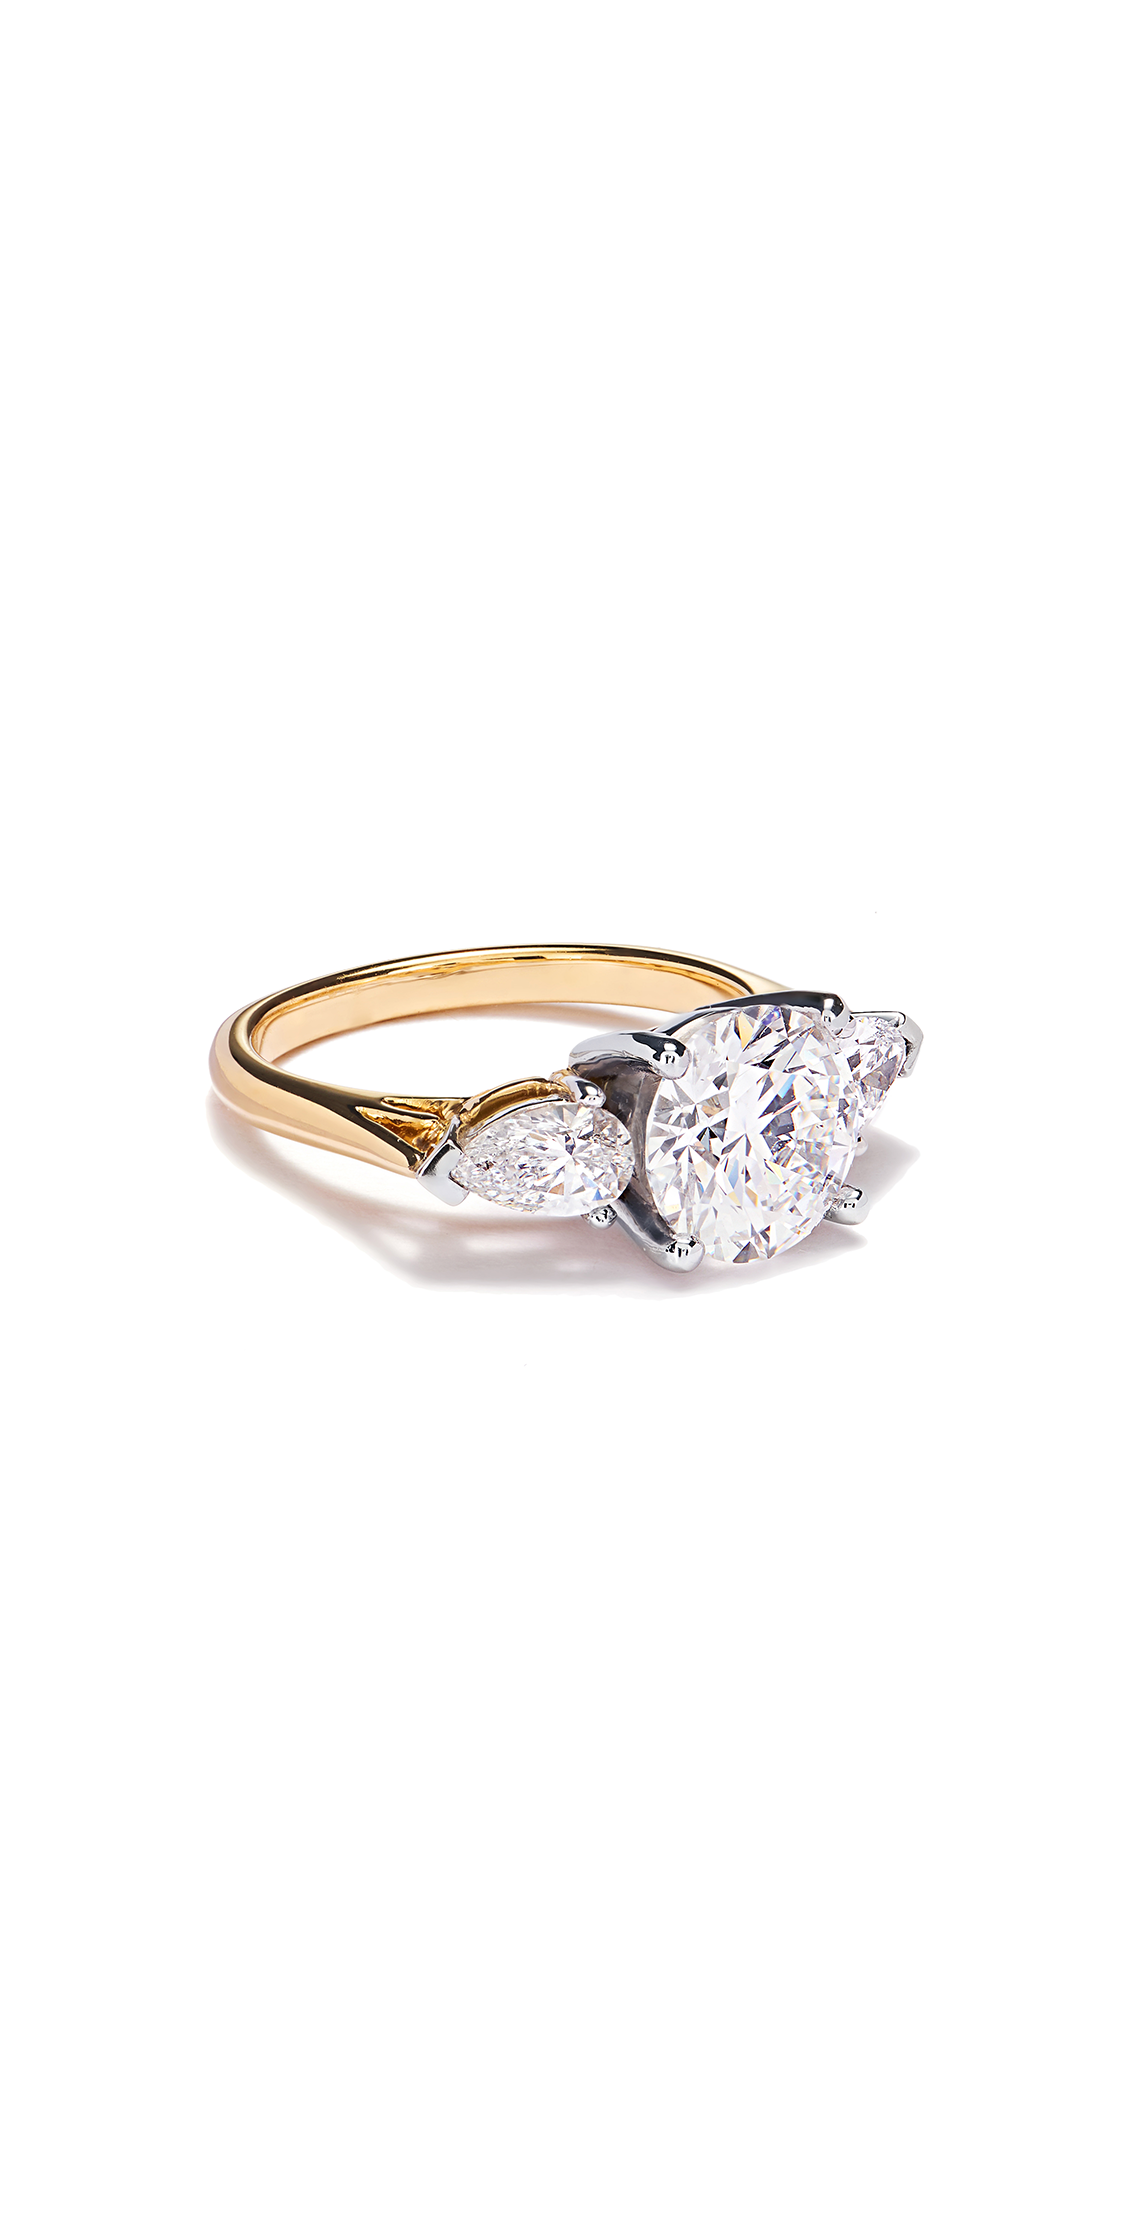 How to Design the Perfect Engagement Ring